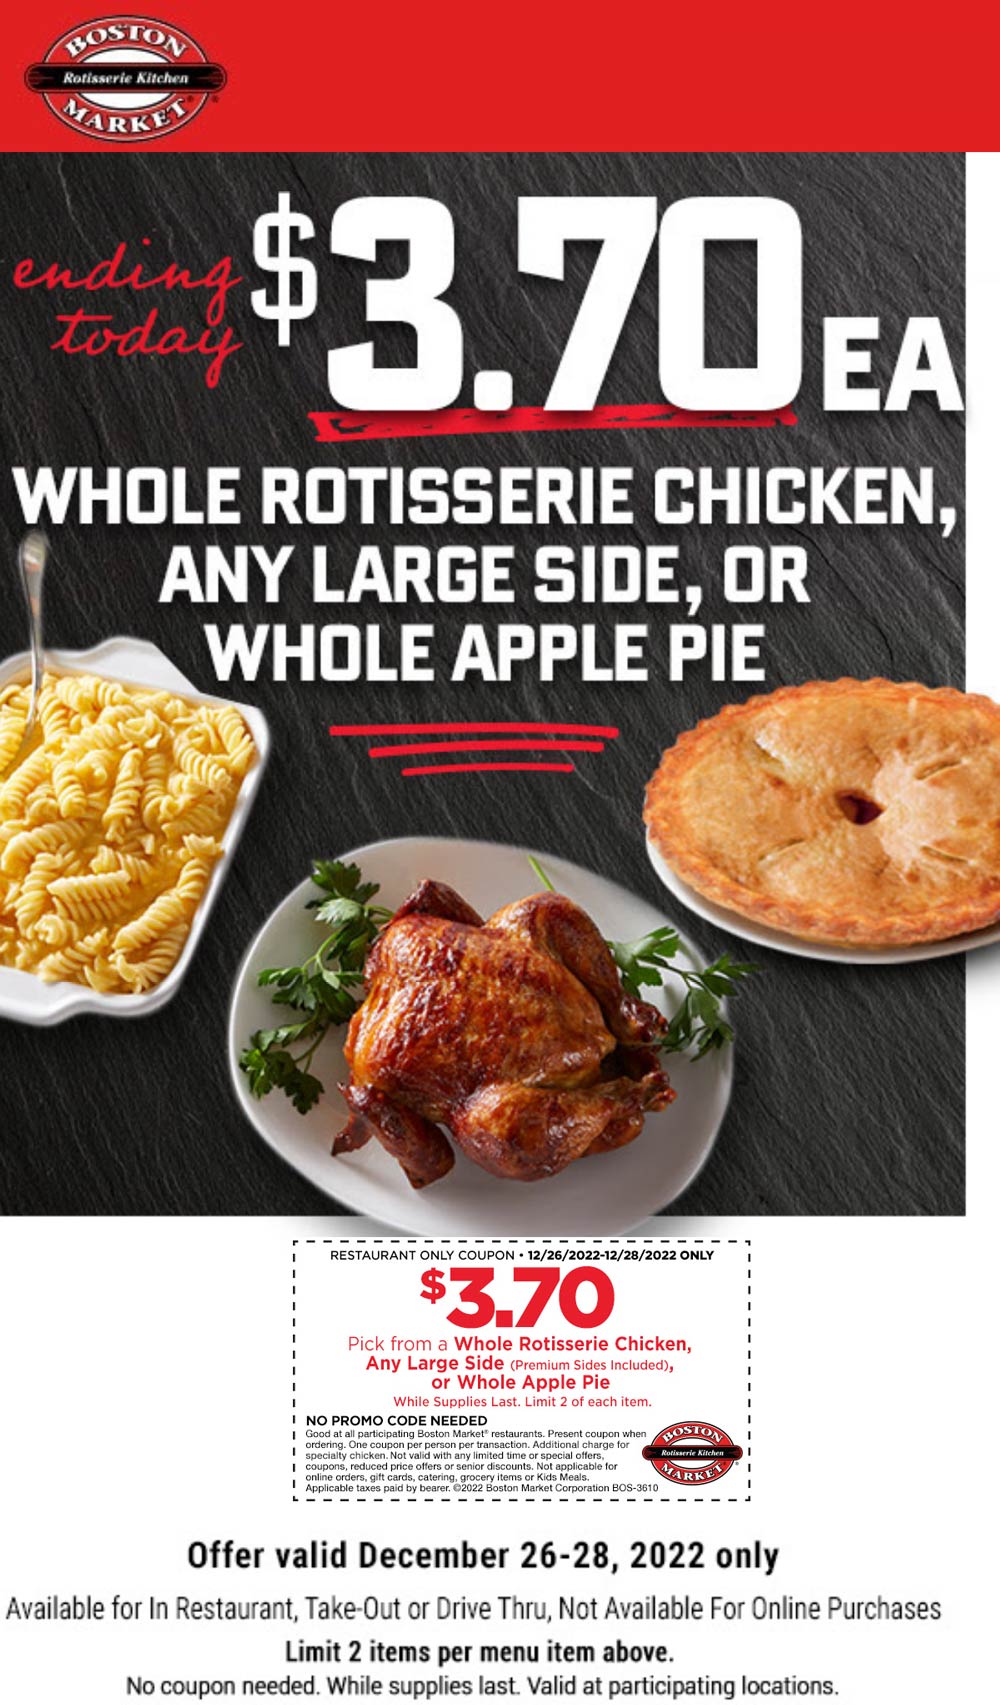 Boston Market restaurants Coupon  Whole chicken or large side or whole apple pie = $3.70 today at Boston Market #bostonmarket 